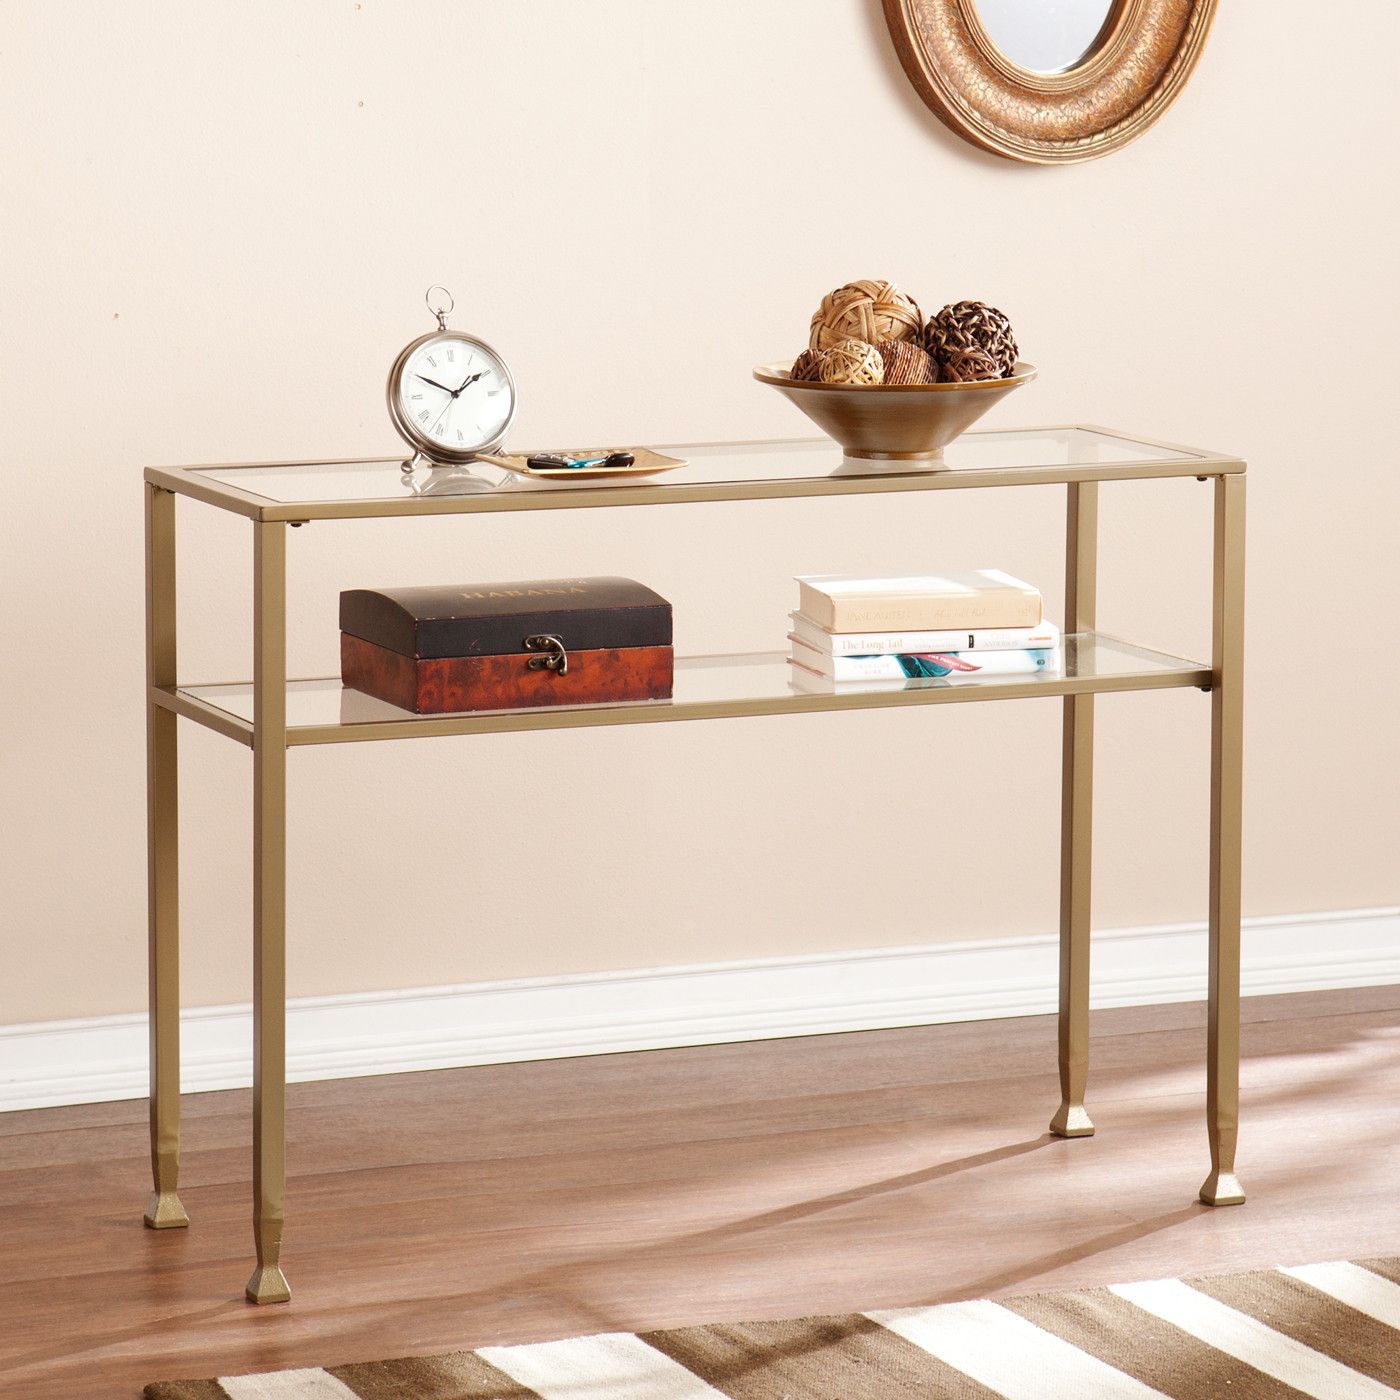 Gold Metal And Glass Console Table | Contemporary Console For Antique Gold And Glass Console Tables (View 2 of 20)